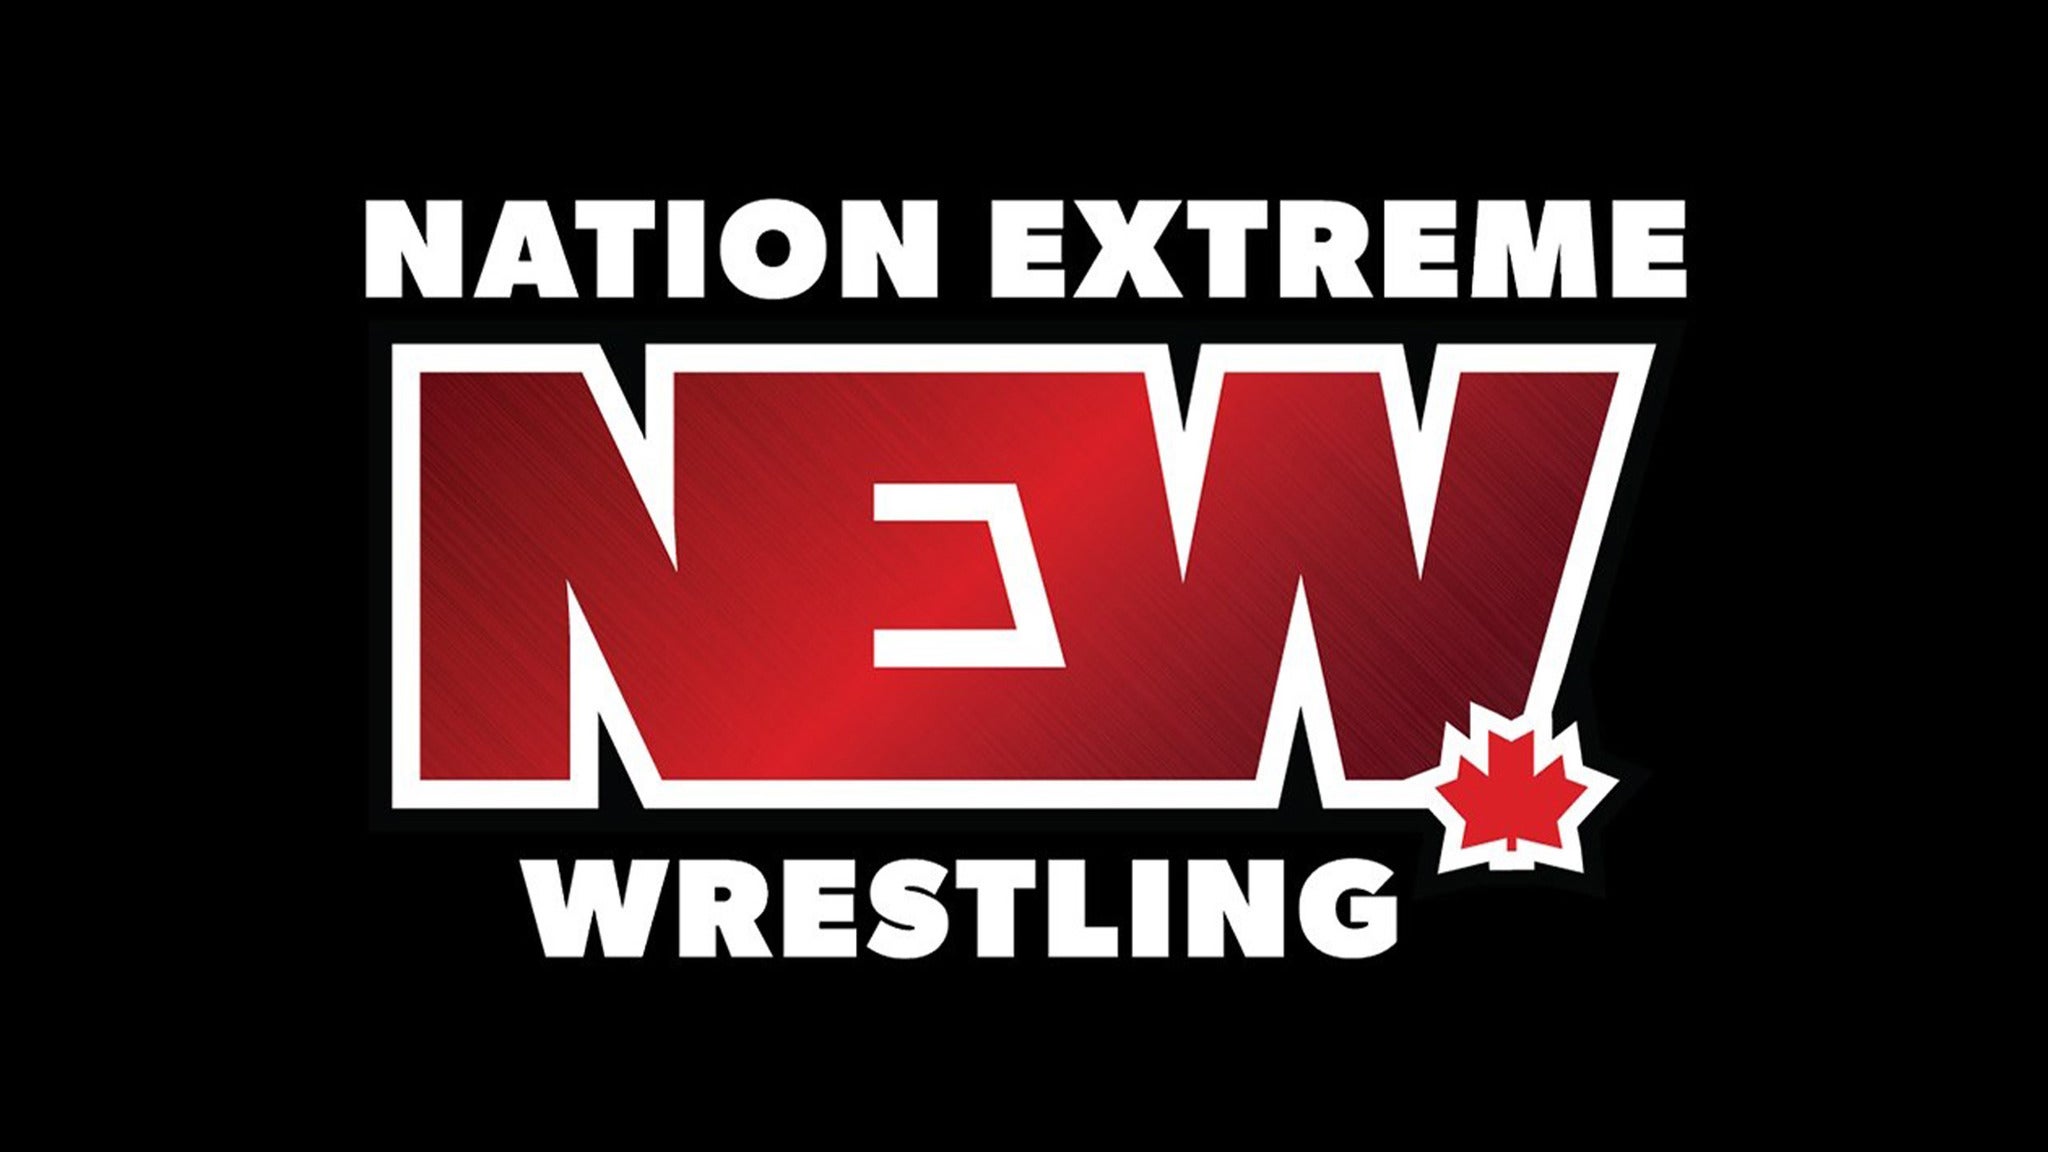 Nation Extreme Wrestling (NEW Wrestling) pre-sale code for performance tickets in Vancouver, BC (Commodore Ballroom)